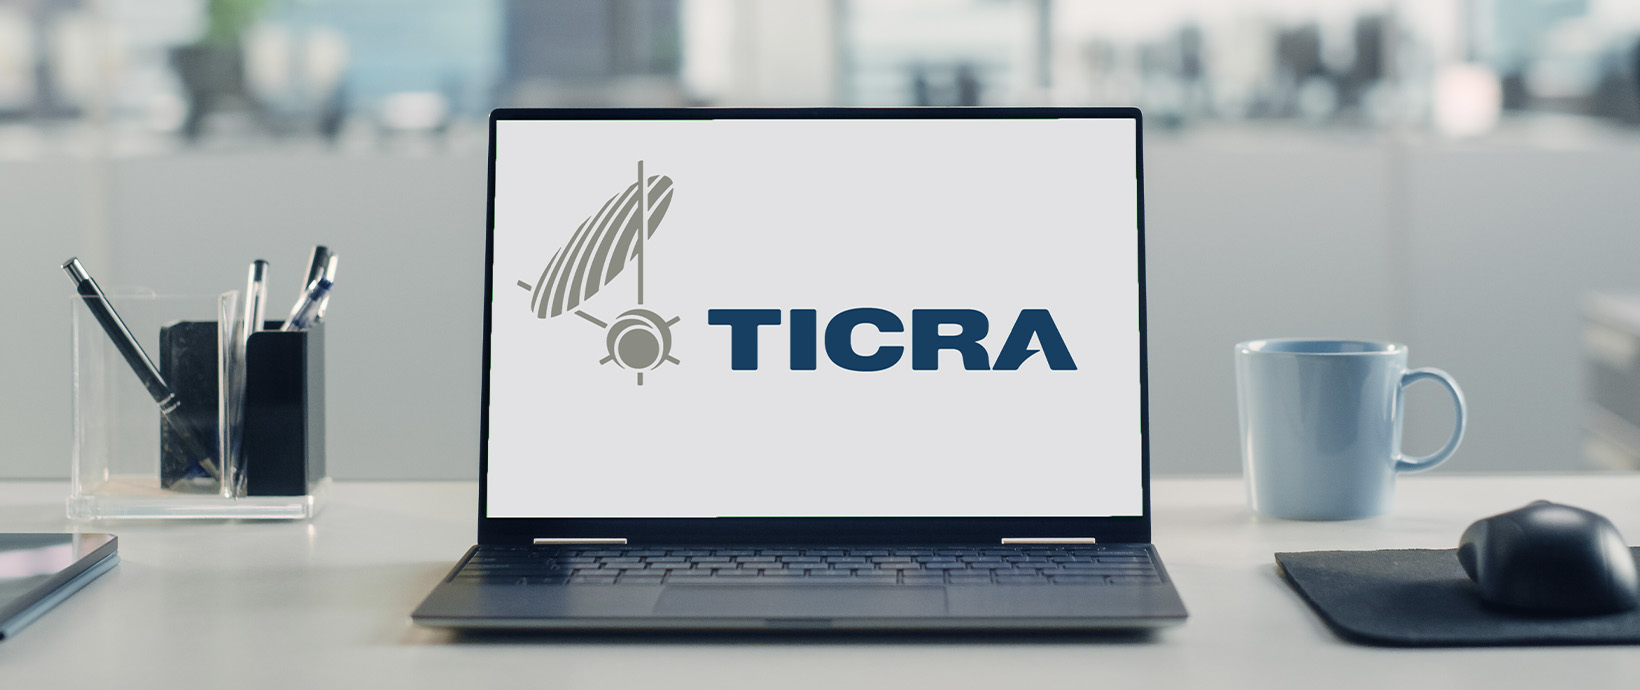 Altair Welcomes TICRA to the Altair Partner Alliance